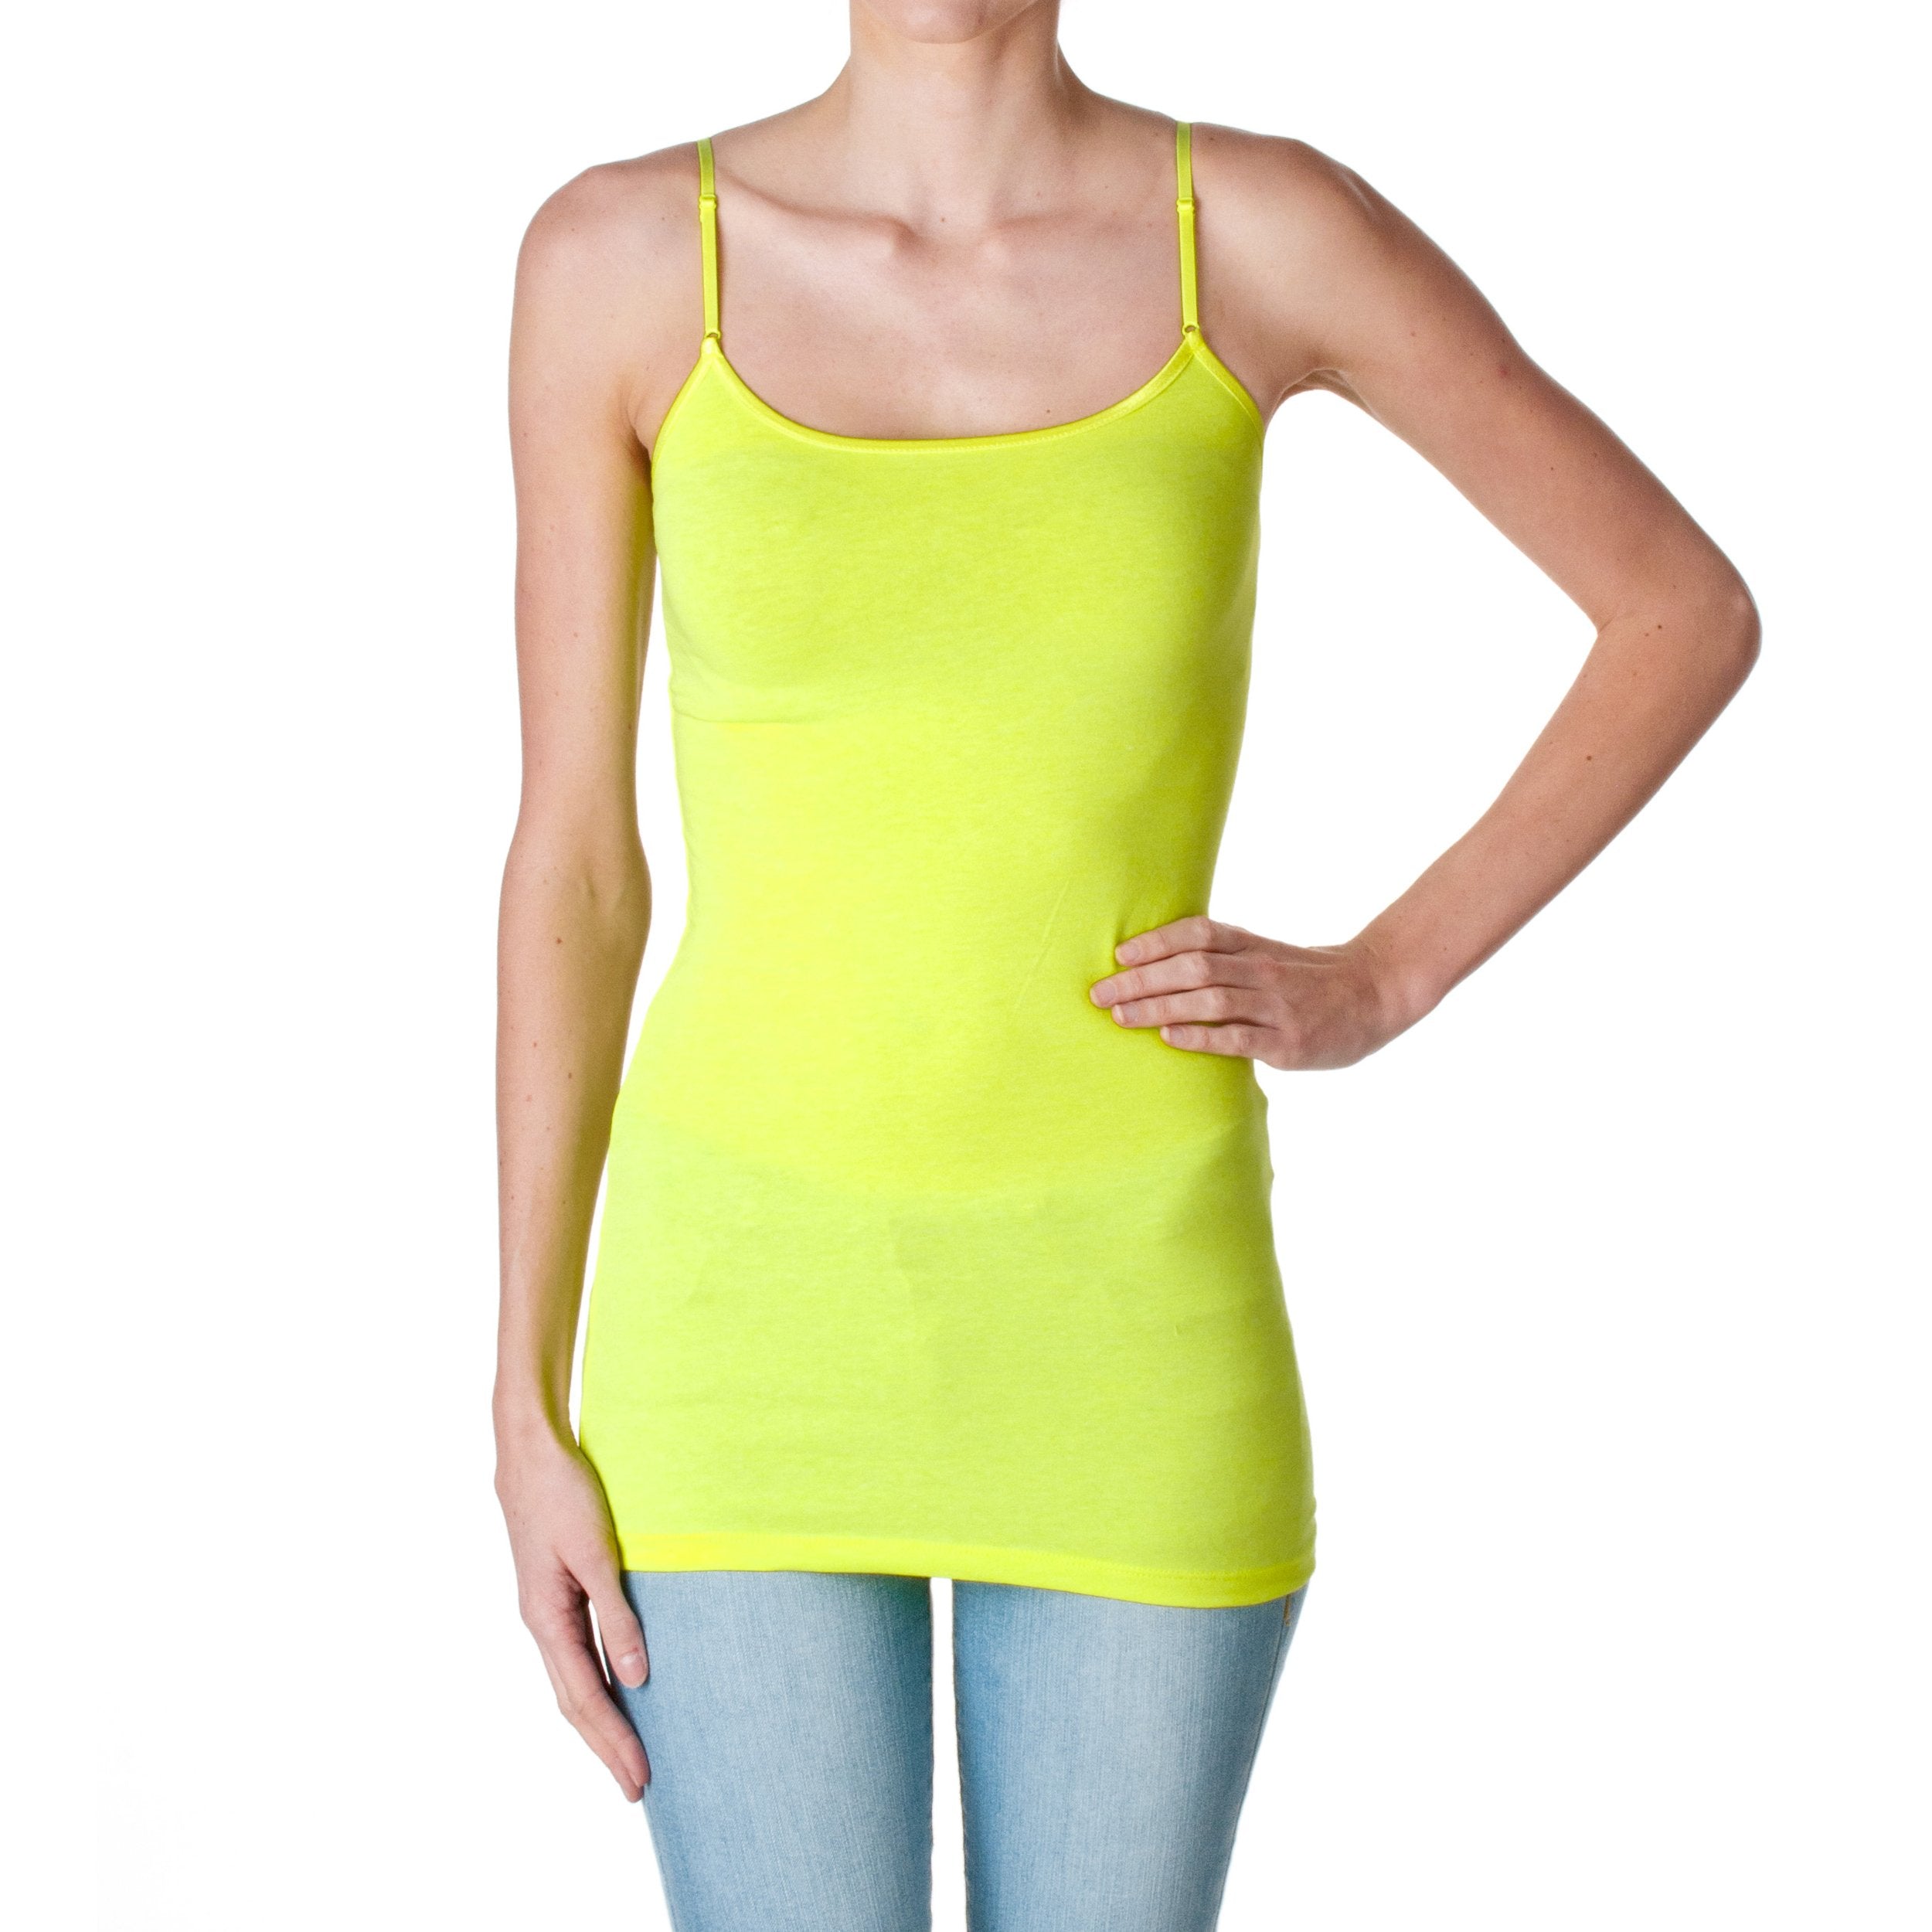 Active Products Plain Long Spaghetti Strap Tank Top Camis Basic Camisole Cotton, Neon Yellow, Large